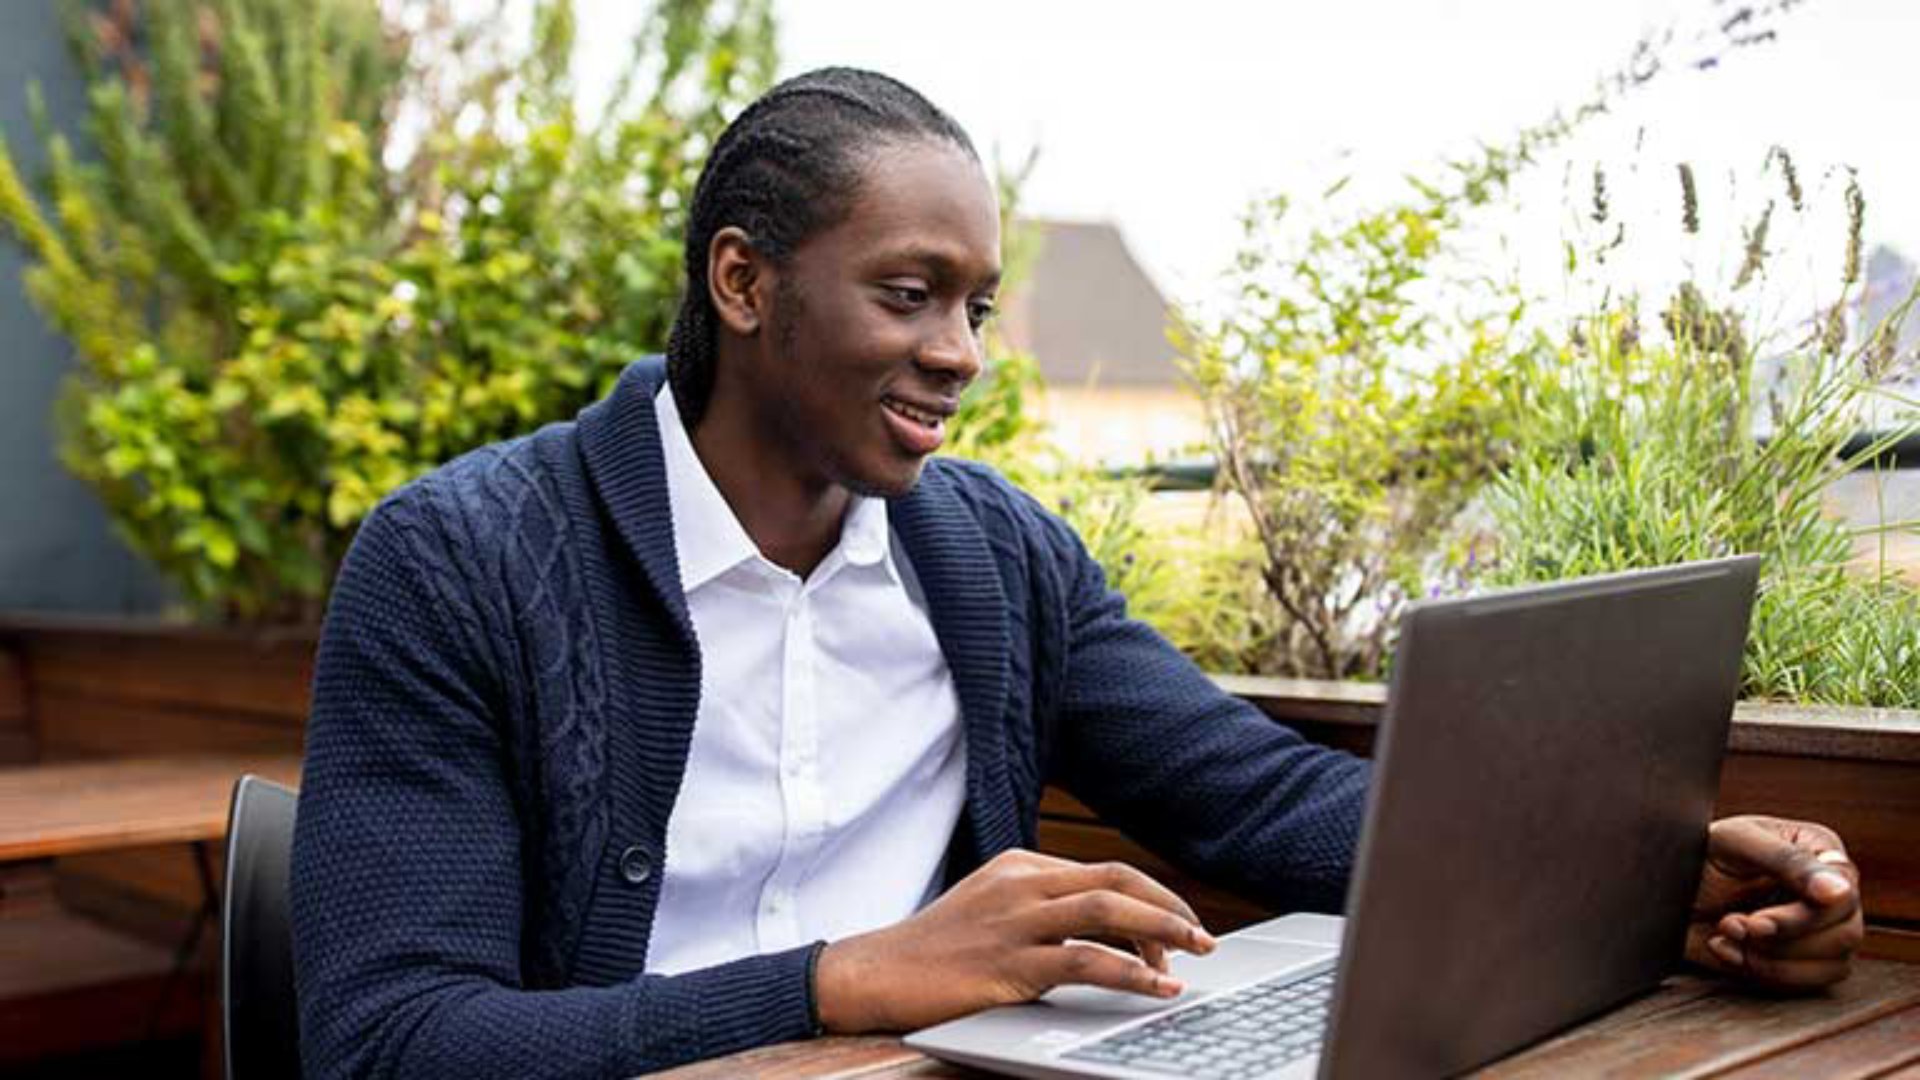 A man with braids using his laptop